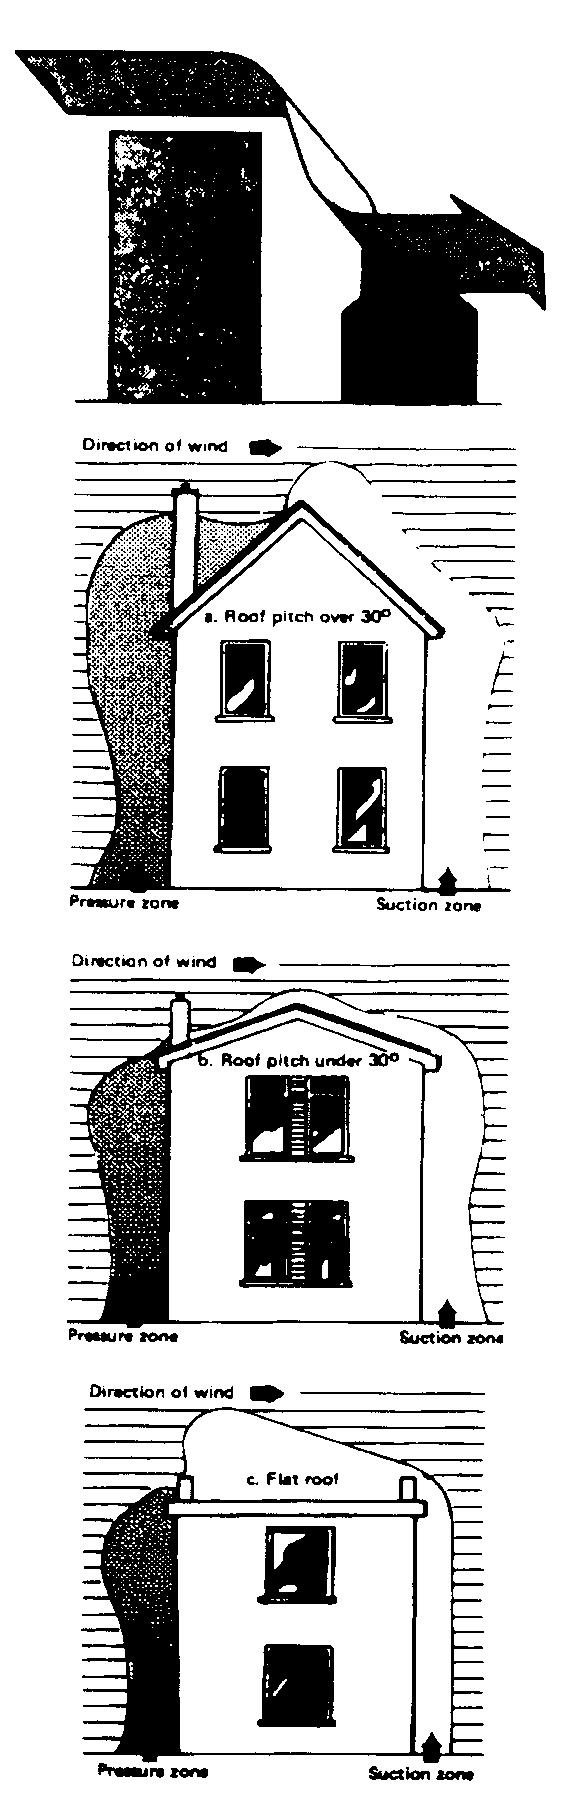 600 min. 2300 min Fig.3 Pitched roof not exceeding 45 o showing external and internal flues and ridge termination DOWN DRAUGHTS 600 min.